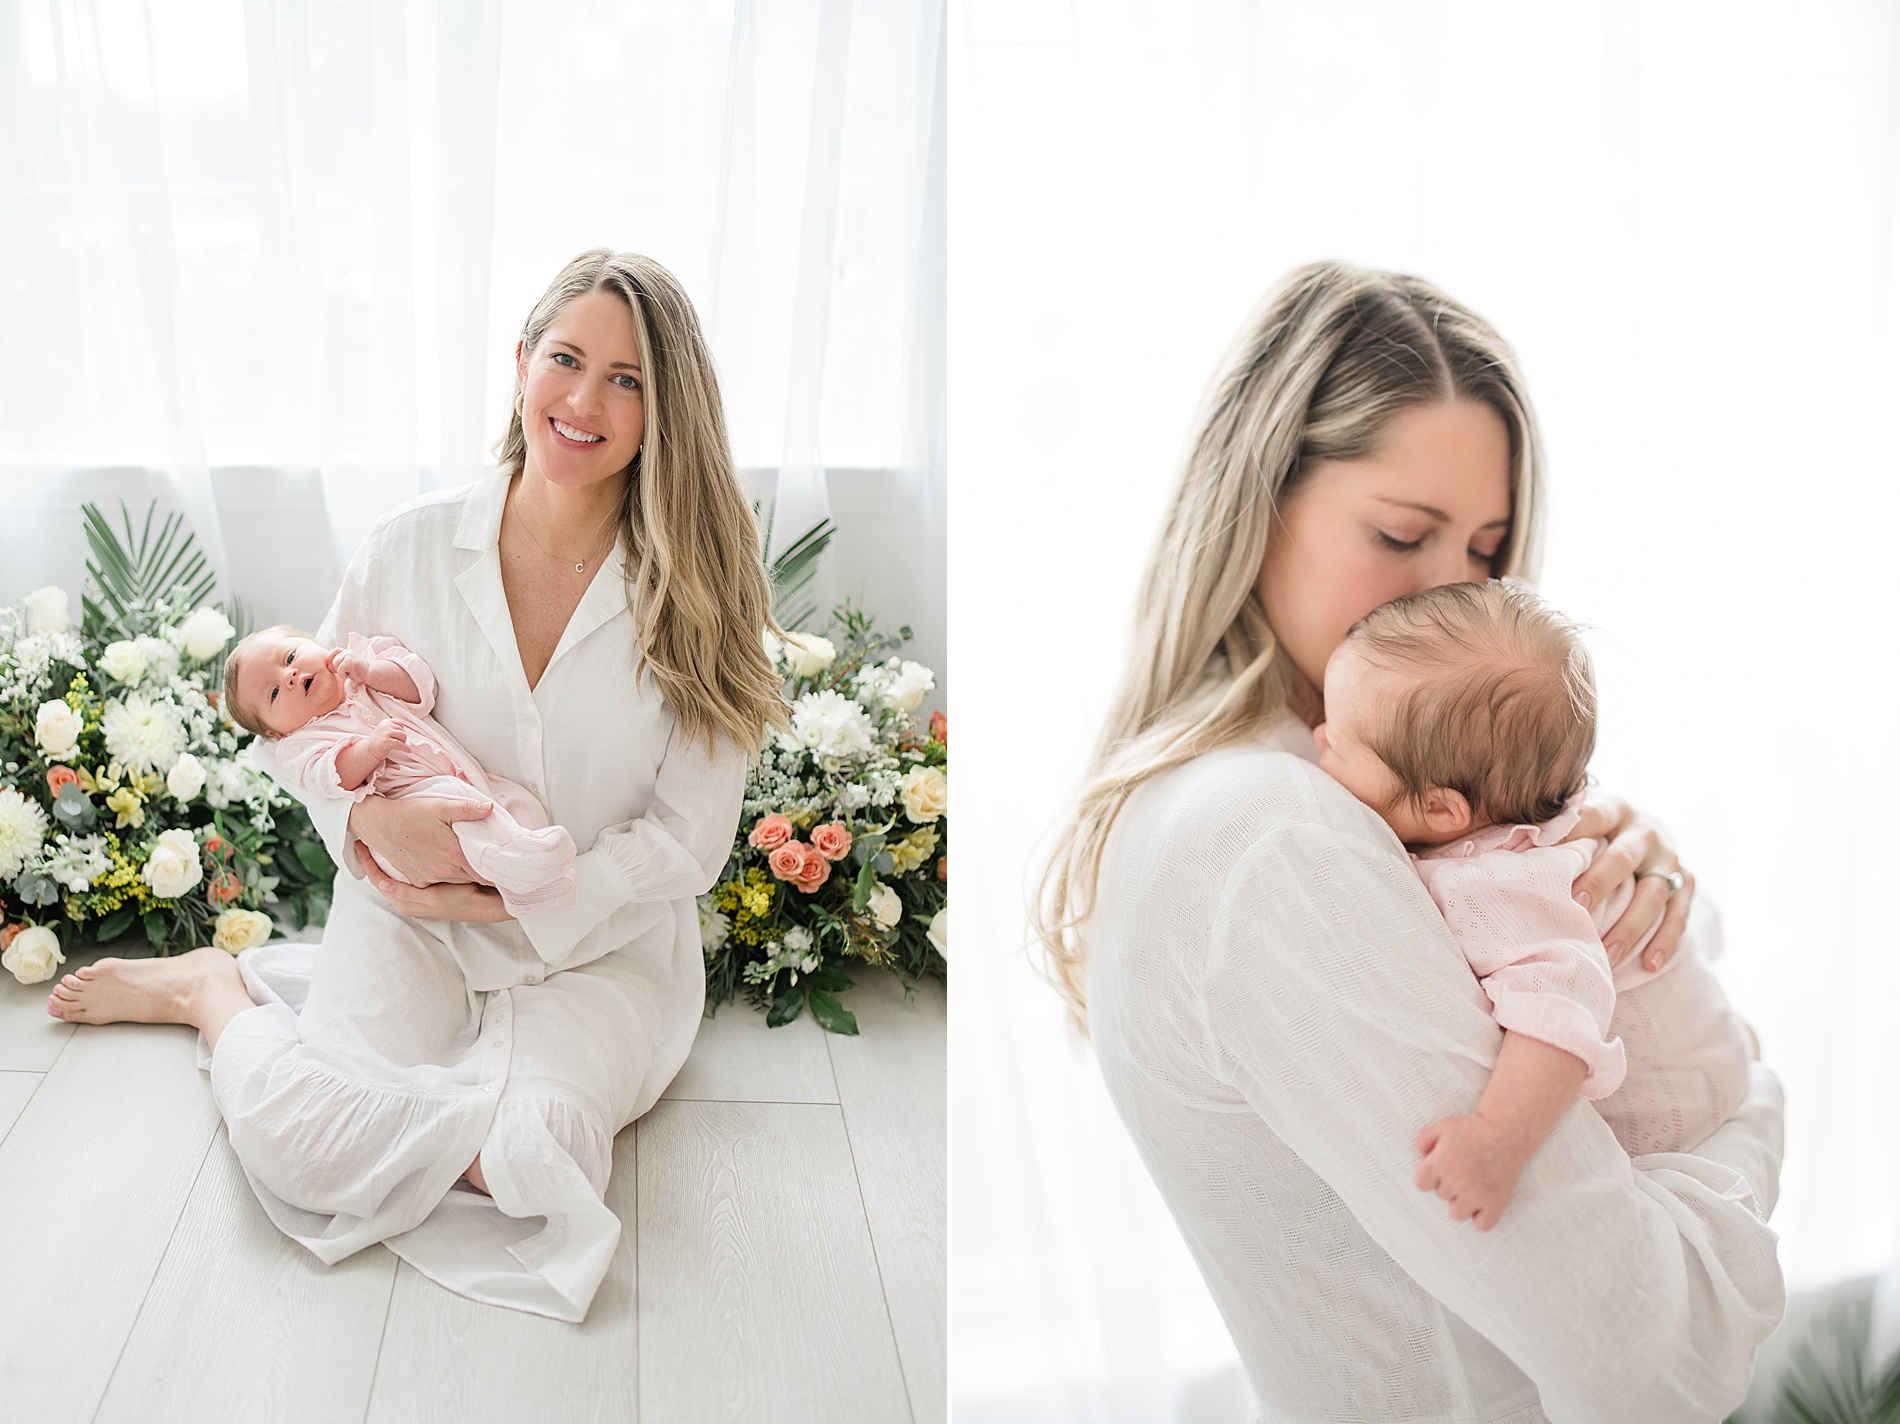 Mommy and Me Portraits taken by Lindsey Dutton Photography, a Dallas newborn photographer